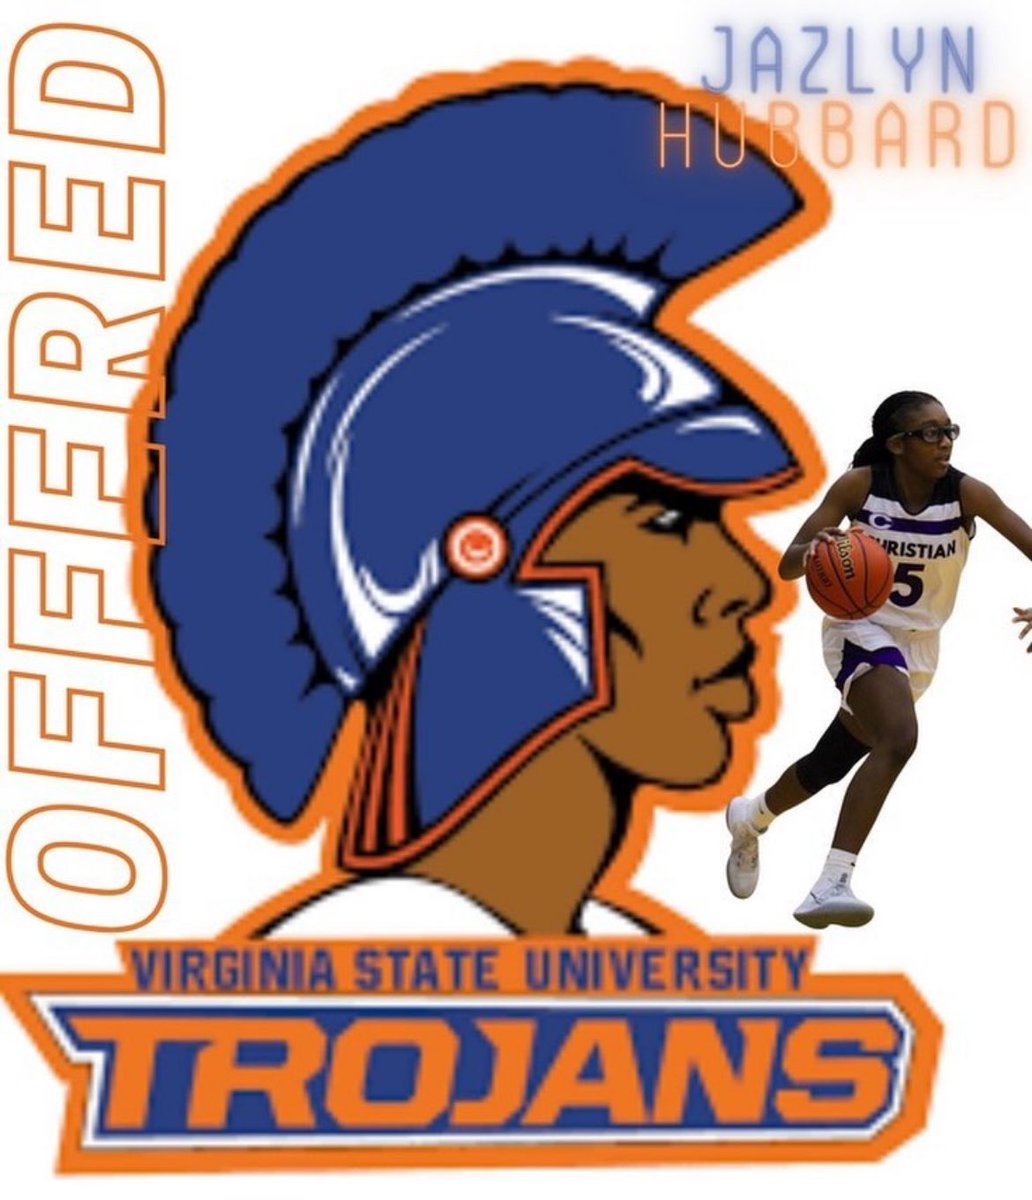 Congrats to Jazlyn Hubbard on your offer to Virginia State. Keep grinding, plenty more to come!! #LadyLoaded